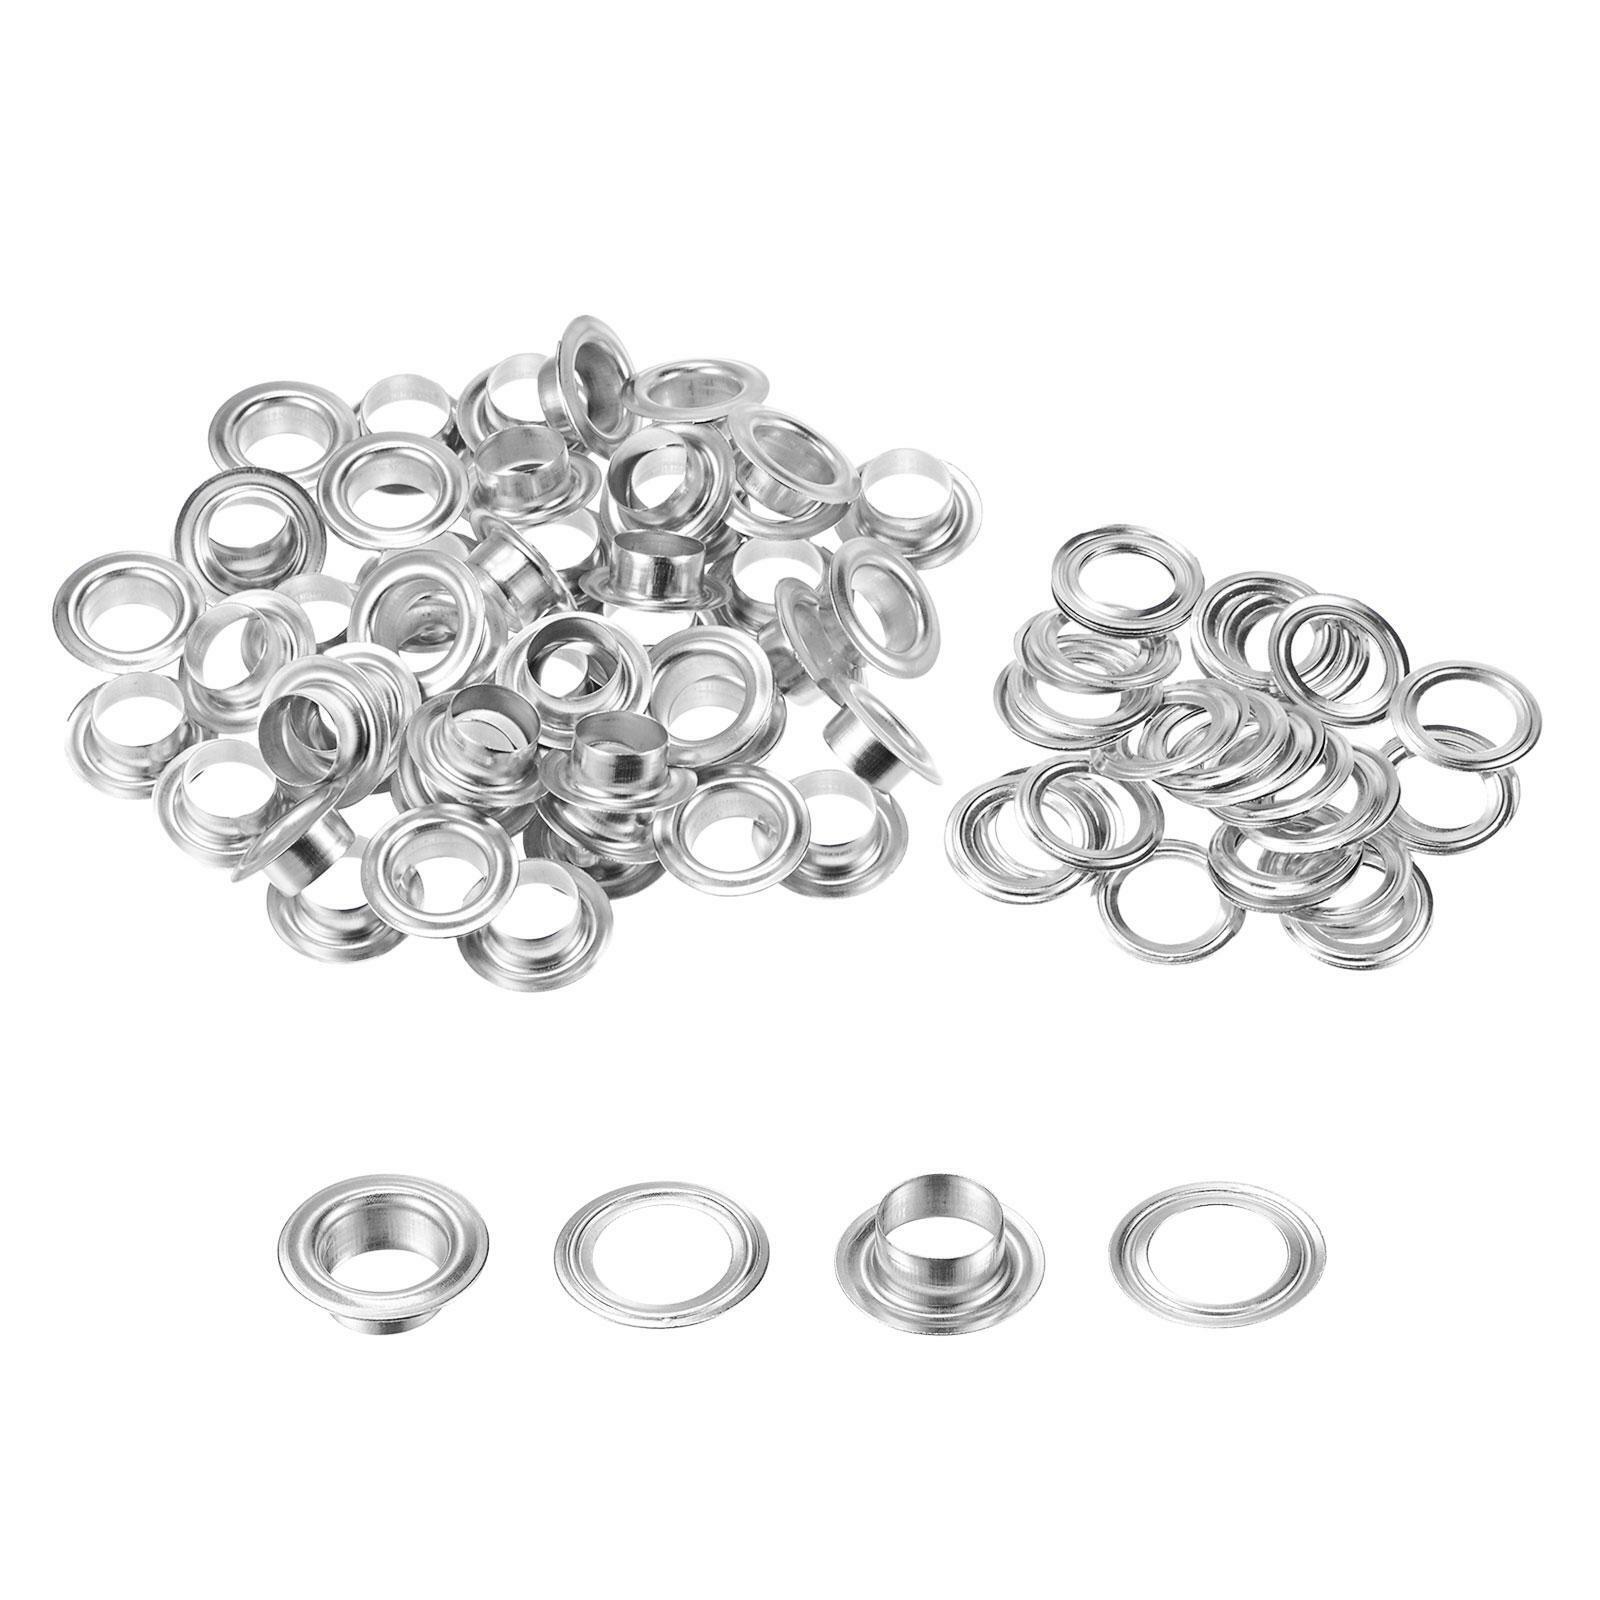 50set 5.5mm Hole Copper Grommets Eyelets Silver Tone For Fabric Leather